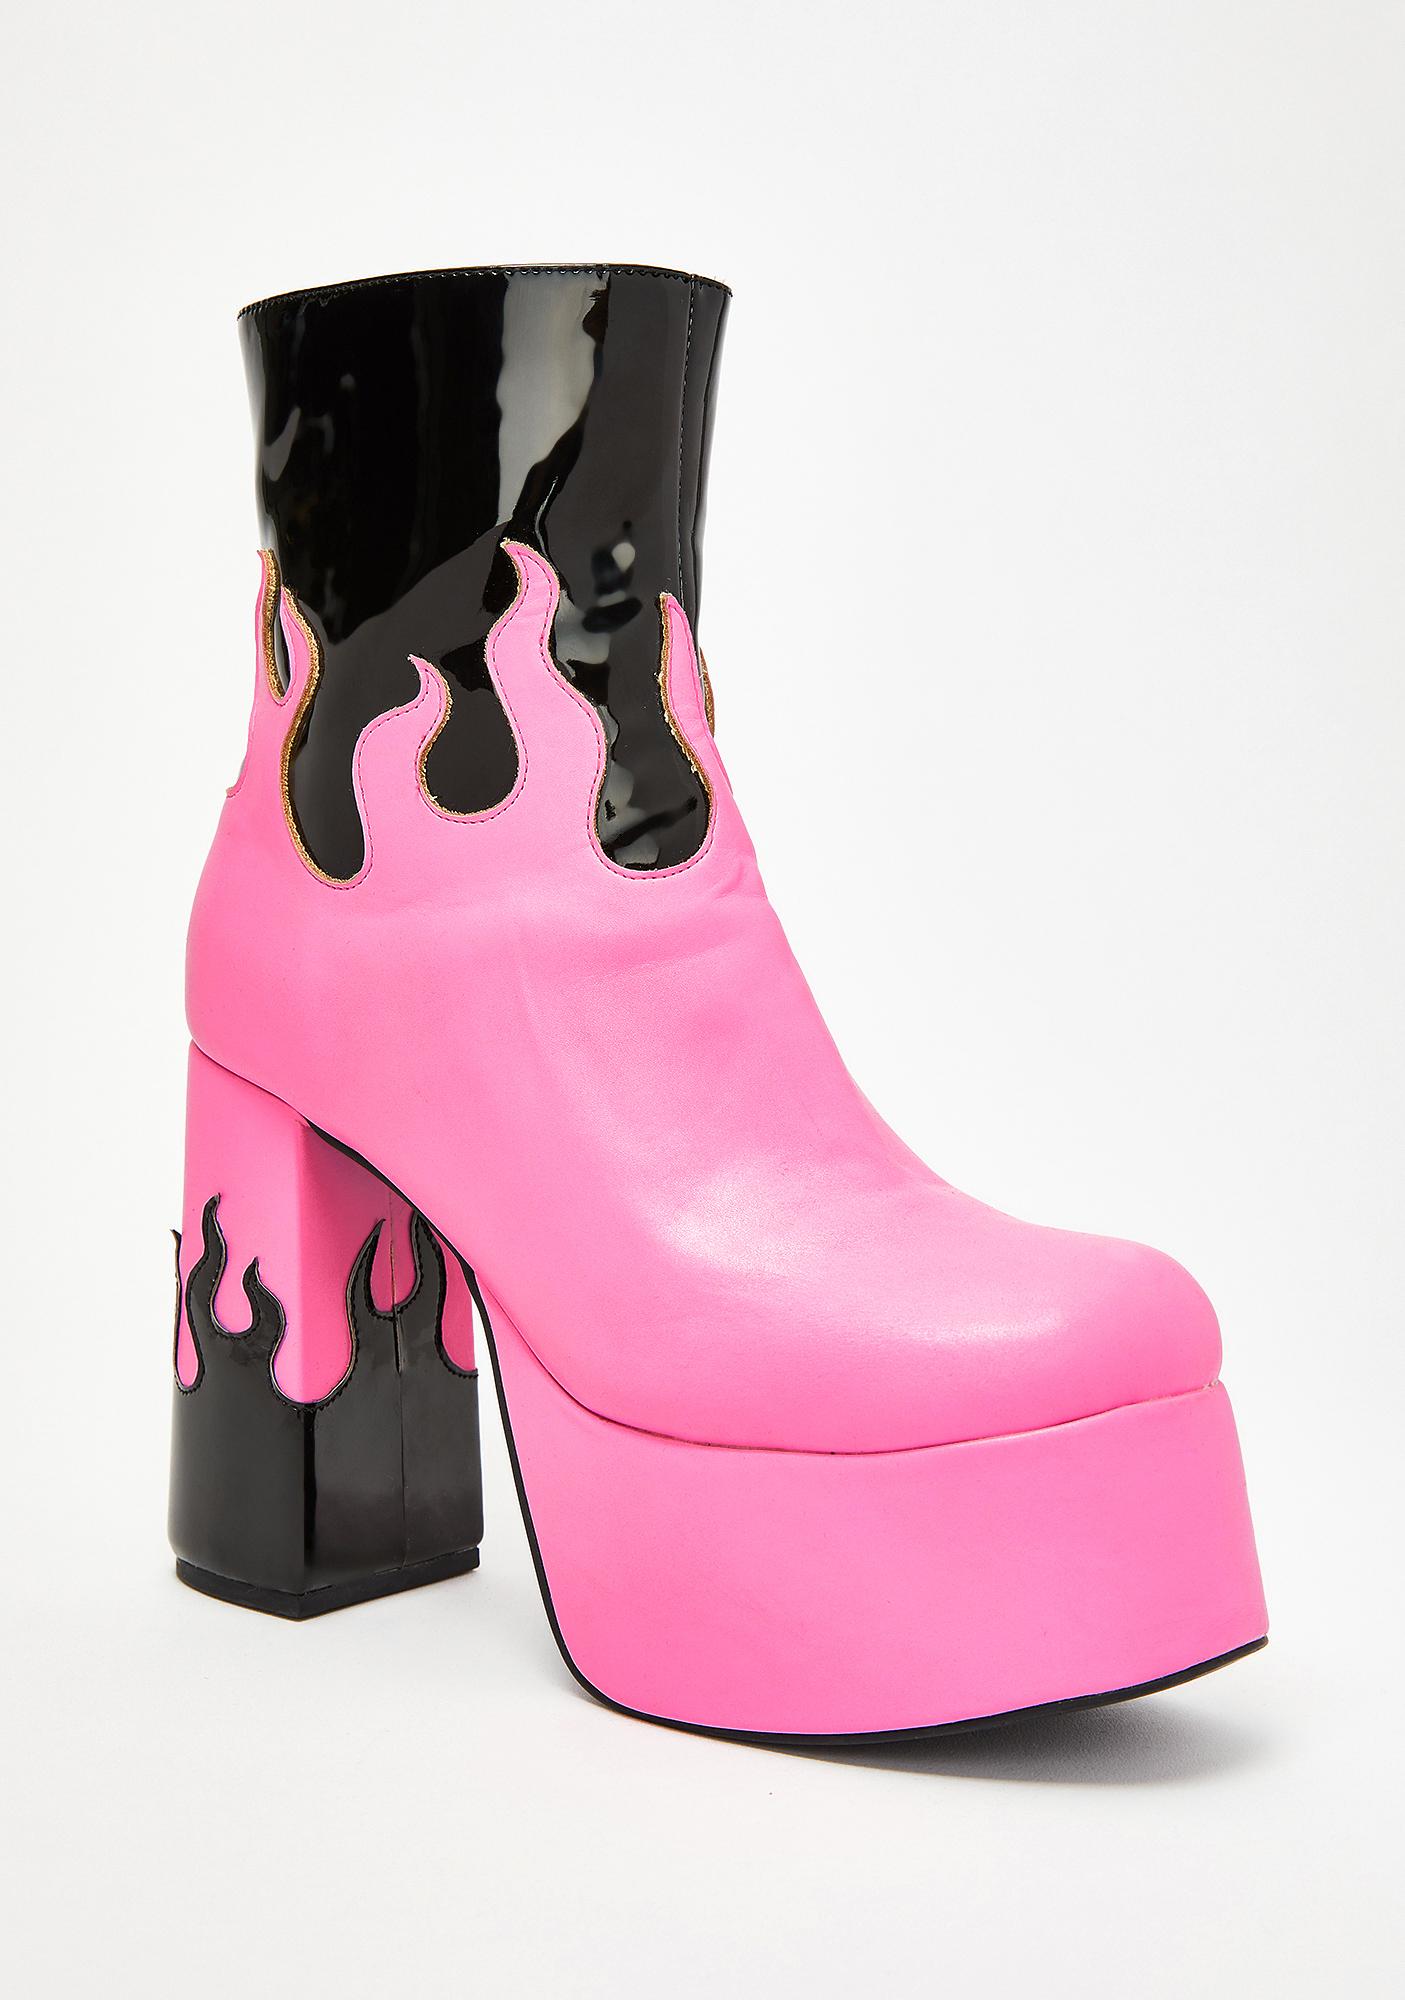 pink \u0026 white wing combat boots \u003e Up to 